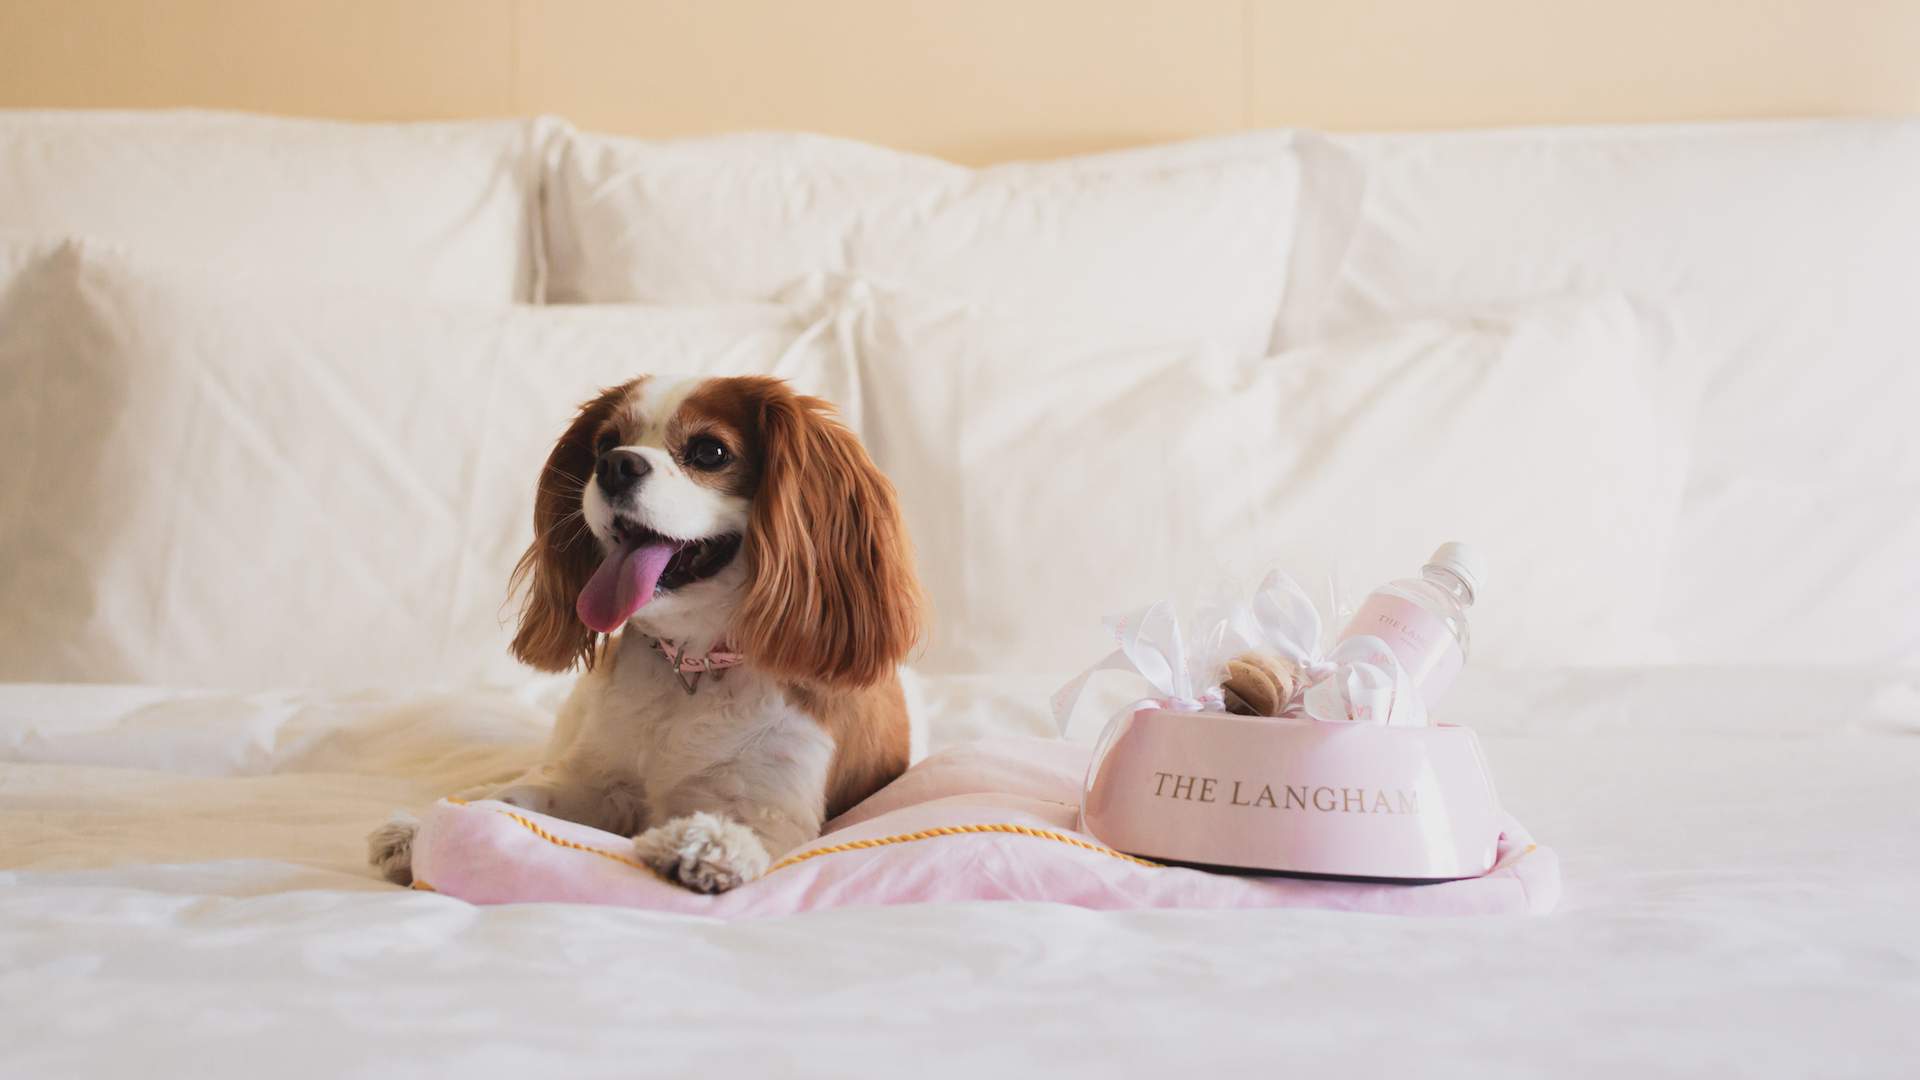 Best dog-friendly hotels Victoria, Melbourne - accommodations - The Langham.